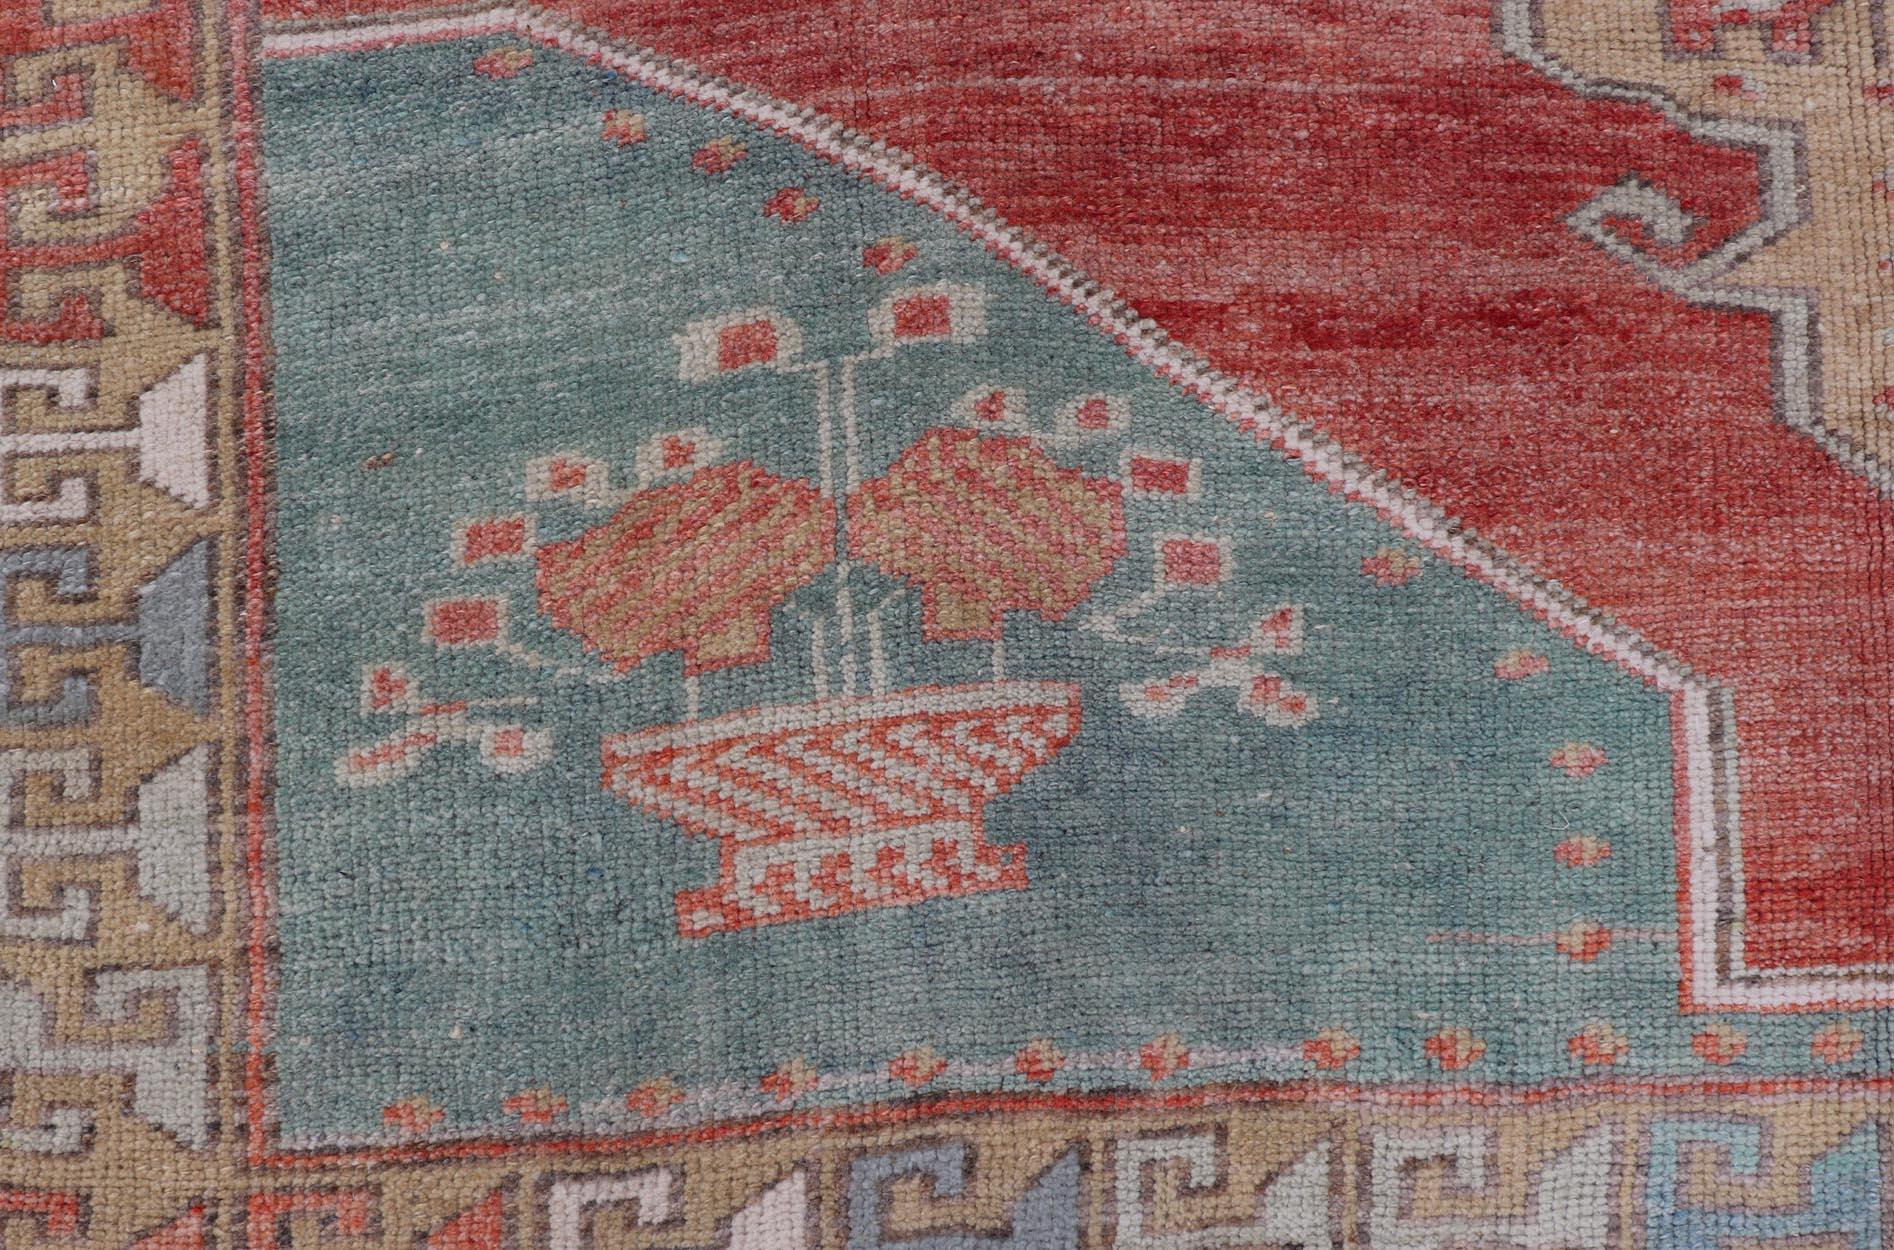 Vintage Turkish Oushak Rug with Large Medallion Design in Soft Red, Blue, Yellow In Excellent Condition For Sale In Atlanta, GA